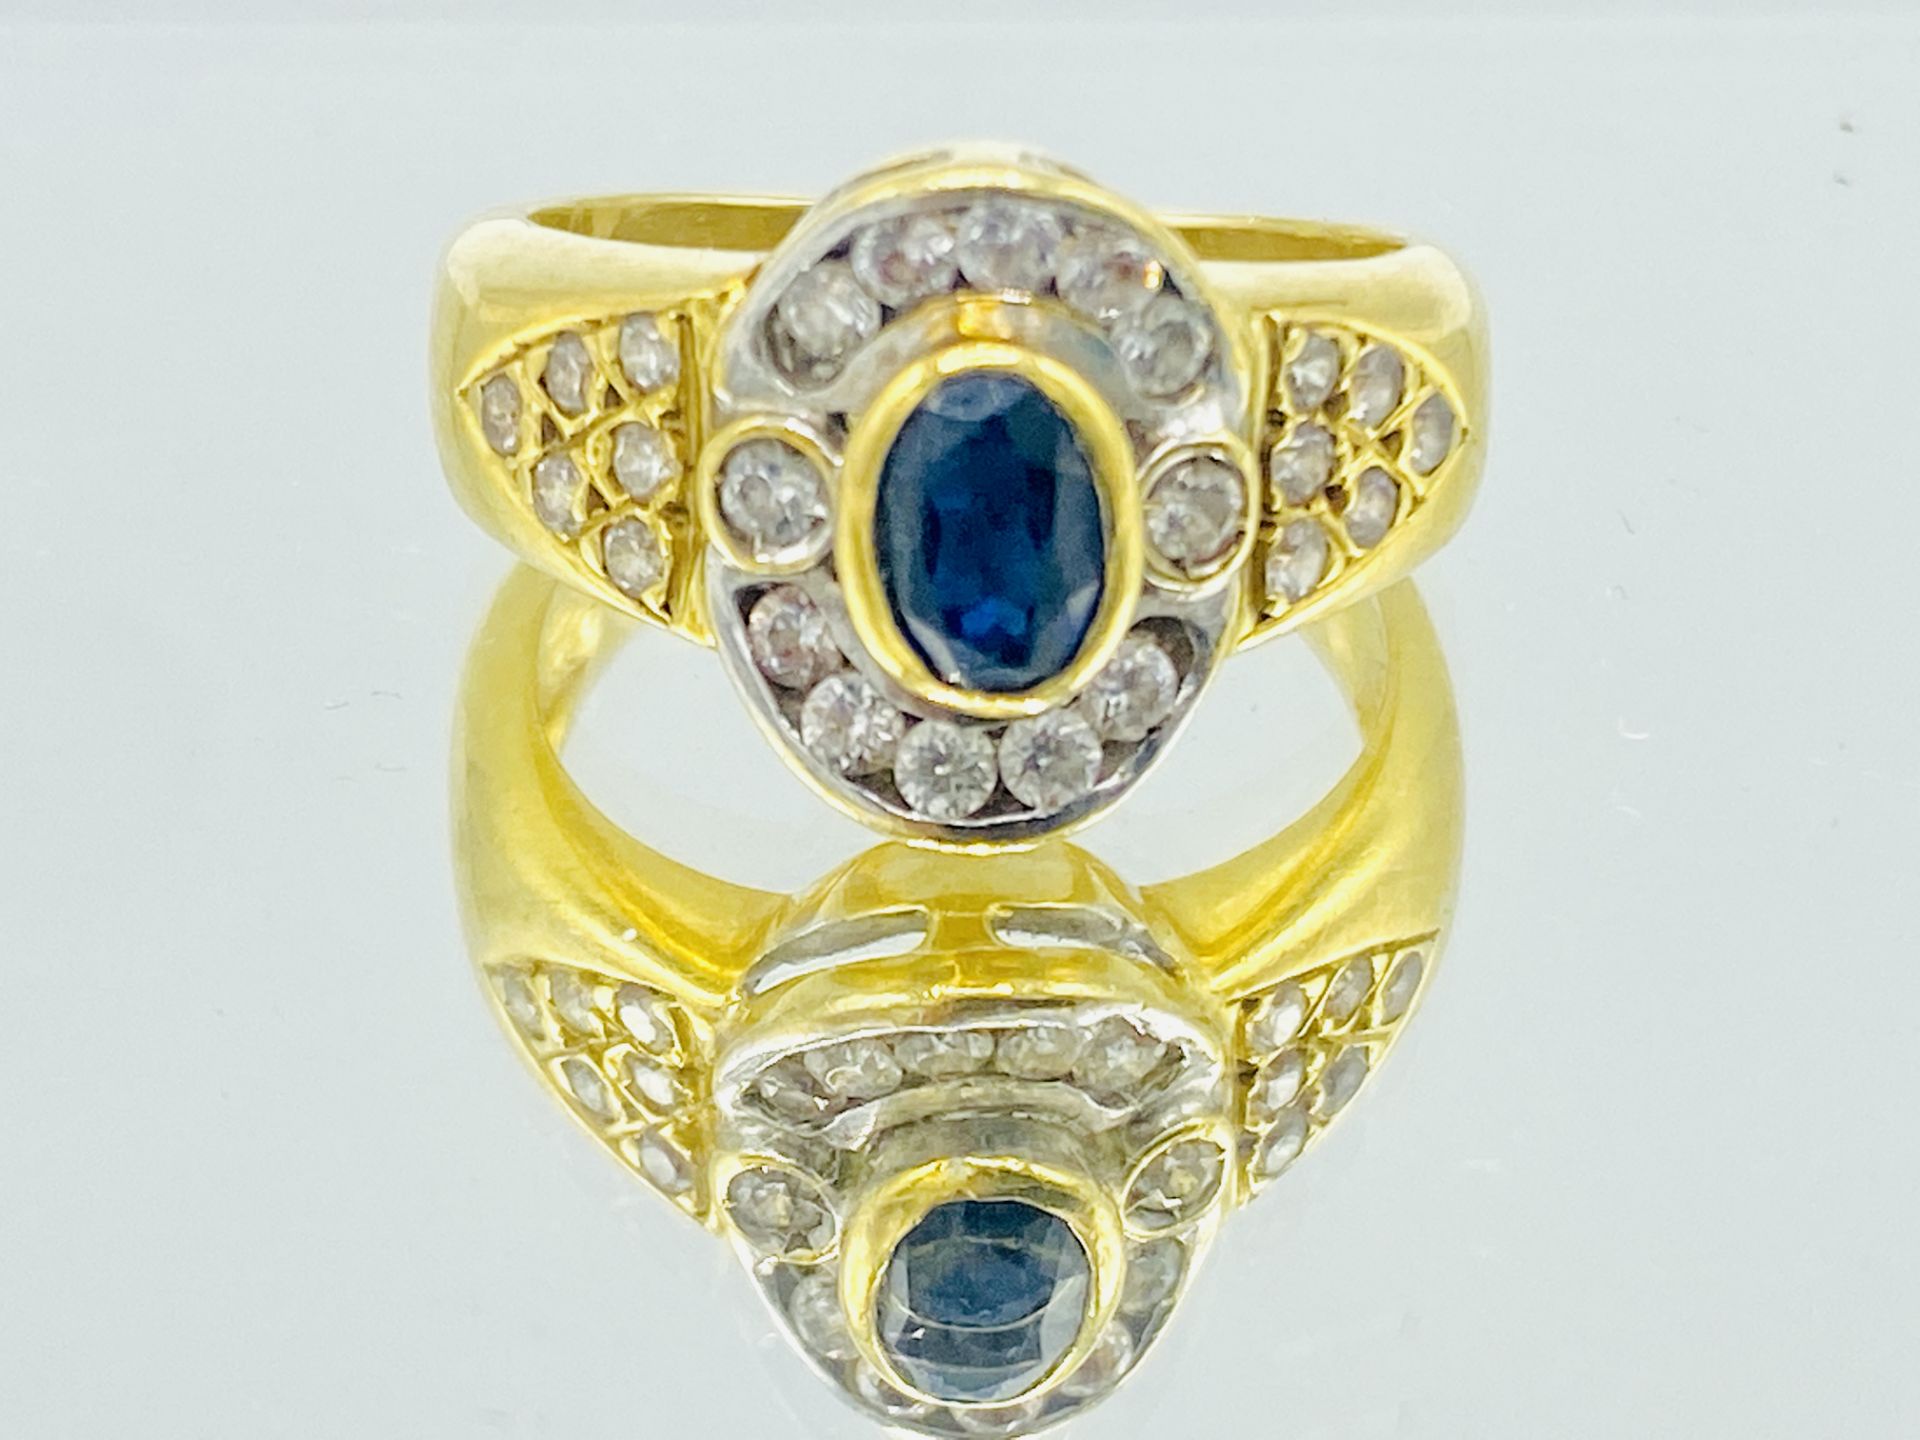 18ct gold, diamond and sapphire ring